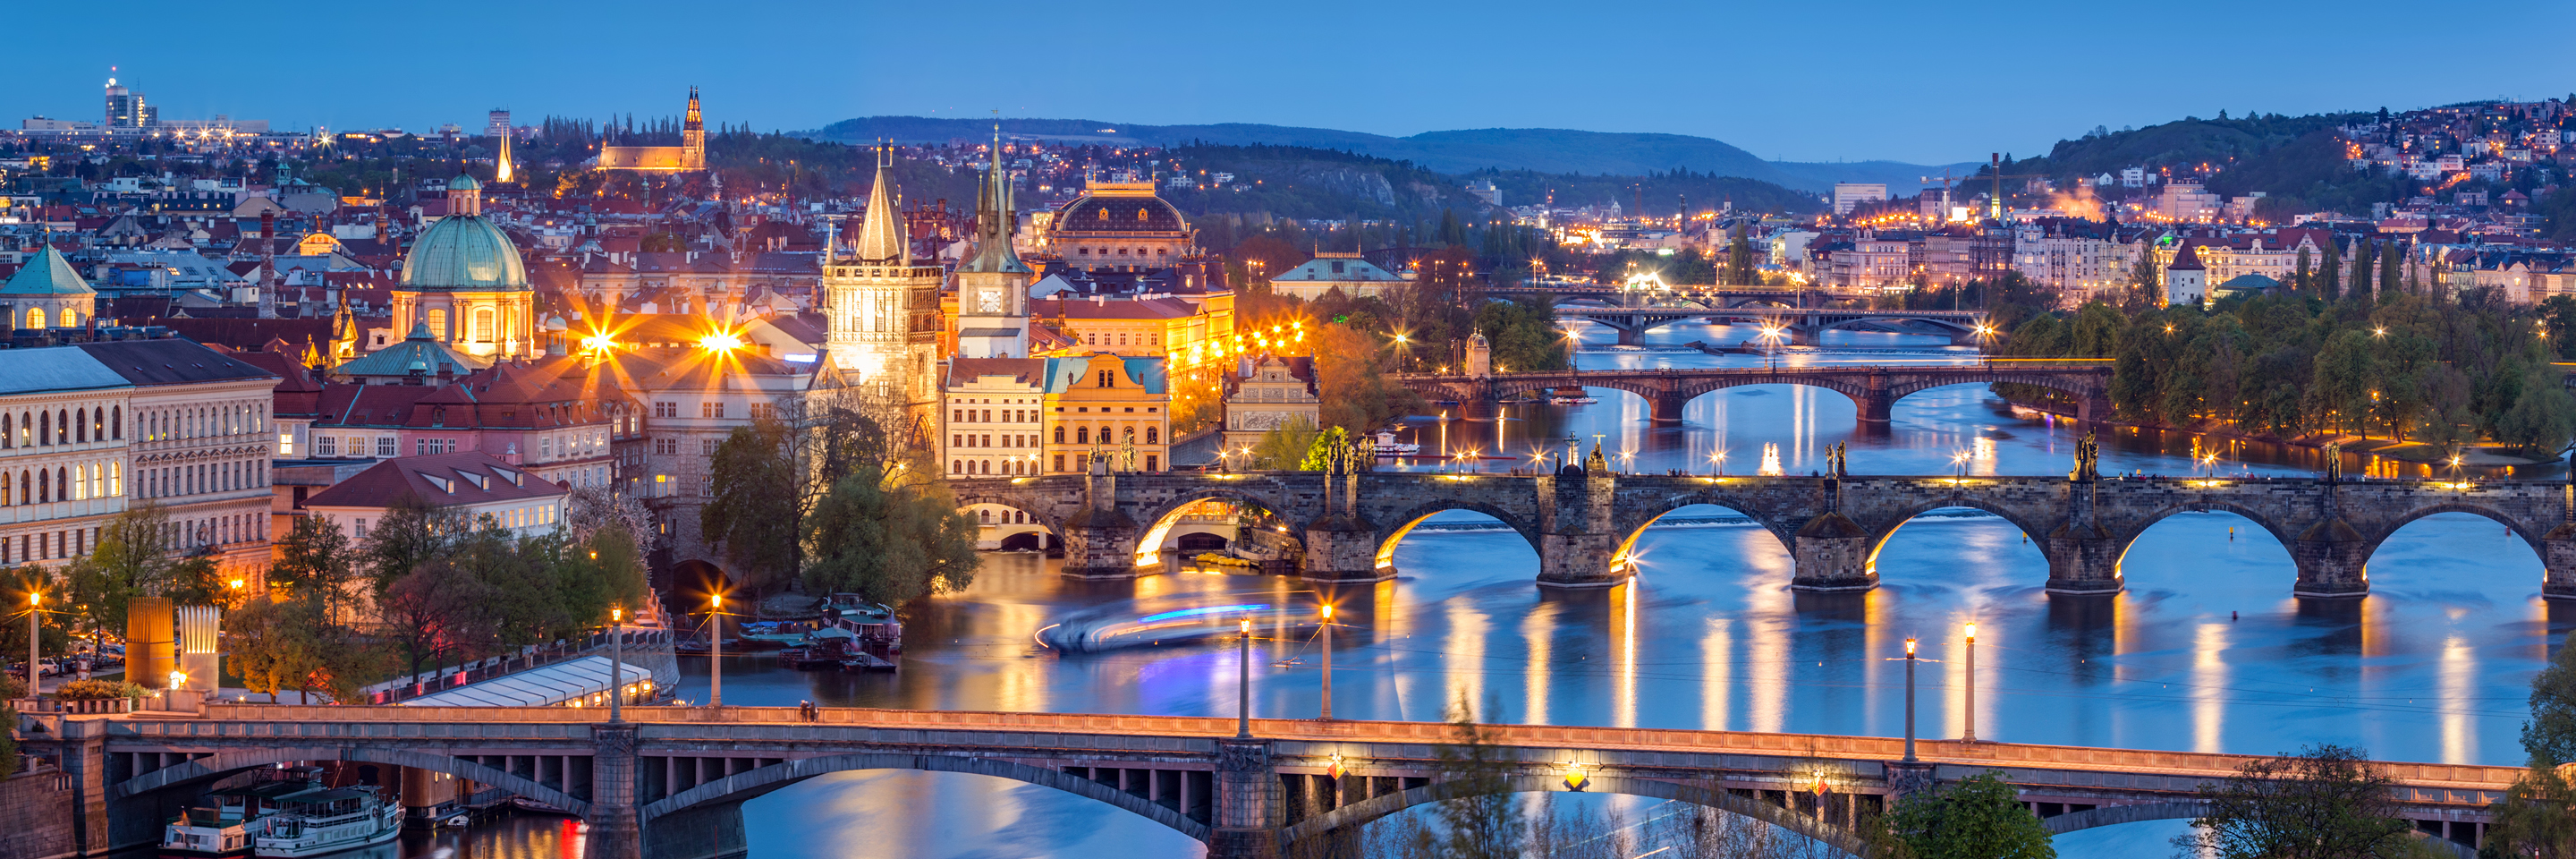 Danube Dreams for Photography Enthusiasts with 2 Nights in Prague (Eastbound)